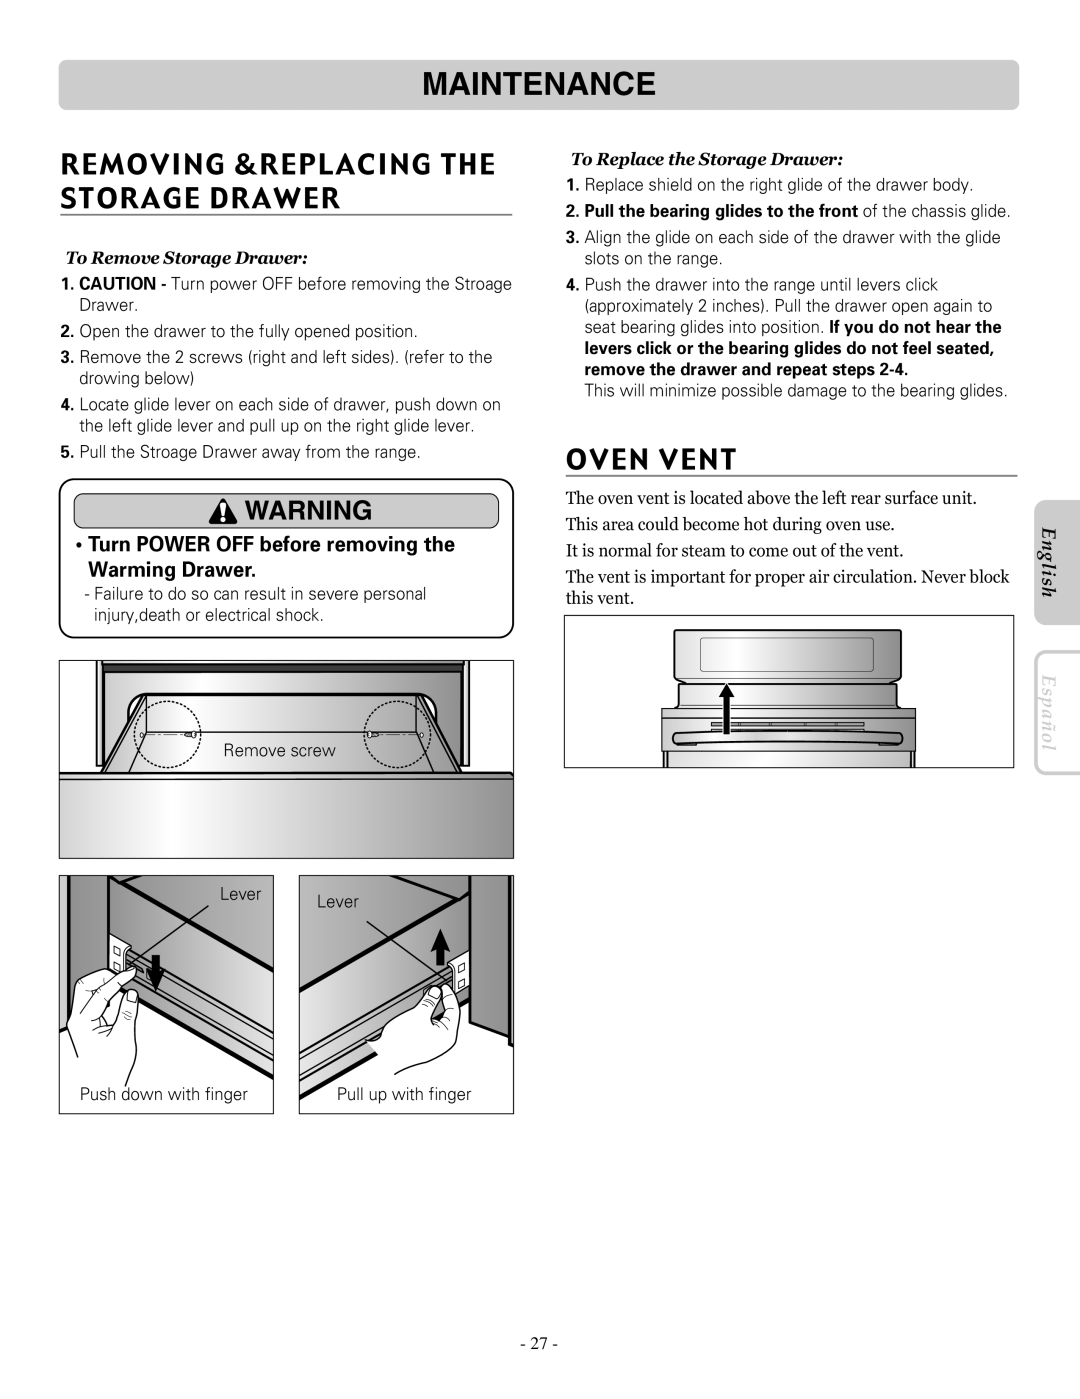 LG Electronics LRE30453SW Maintenance, Removing &Replacing The Storage Drawer, Oven Vent, To Remove Storage Drawer 